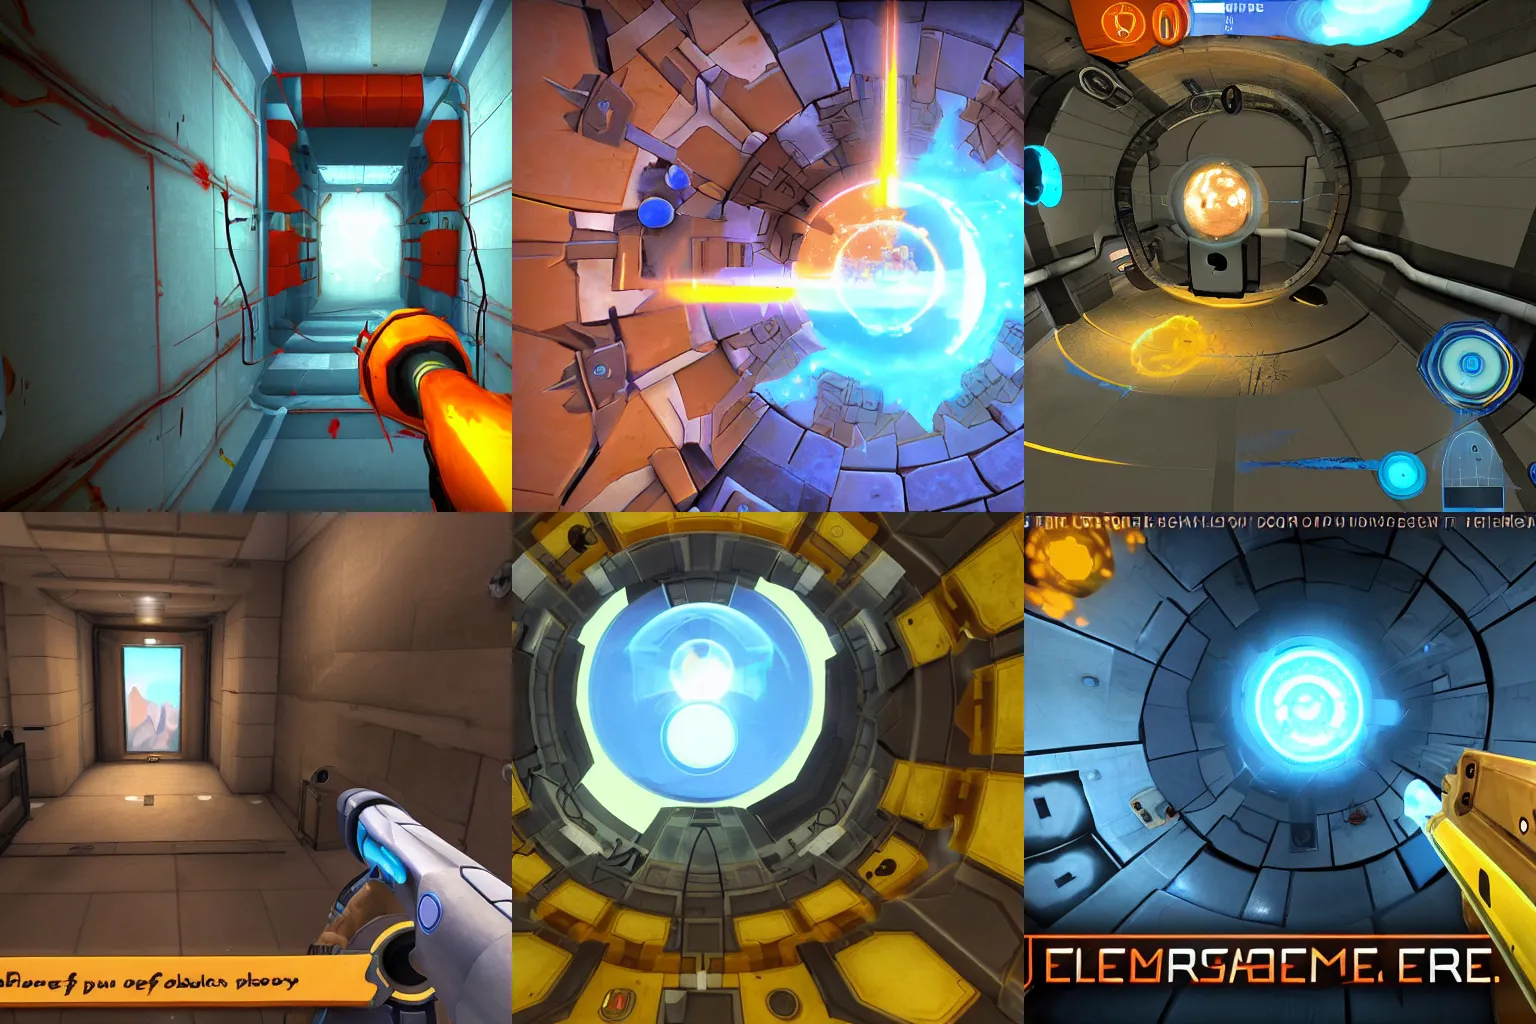 Prompt: screenshot of Portal 3 by Valve